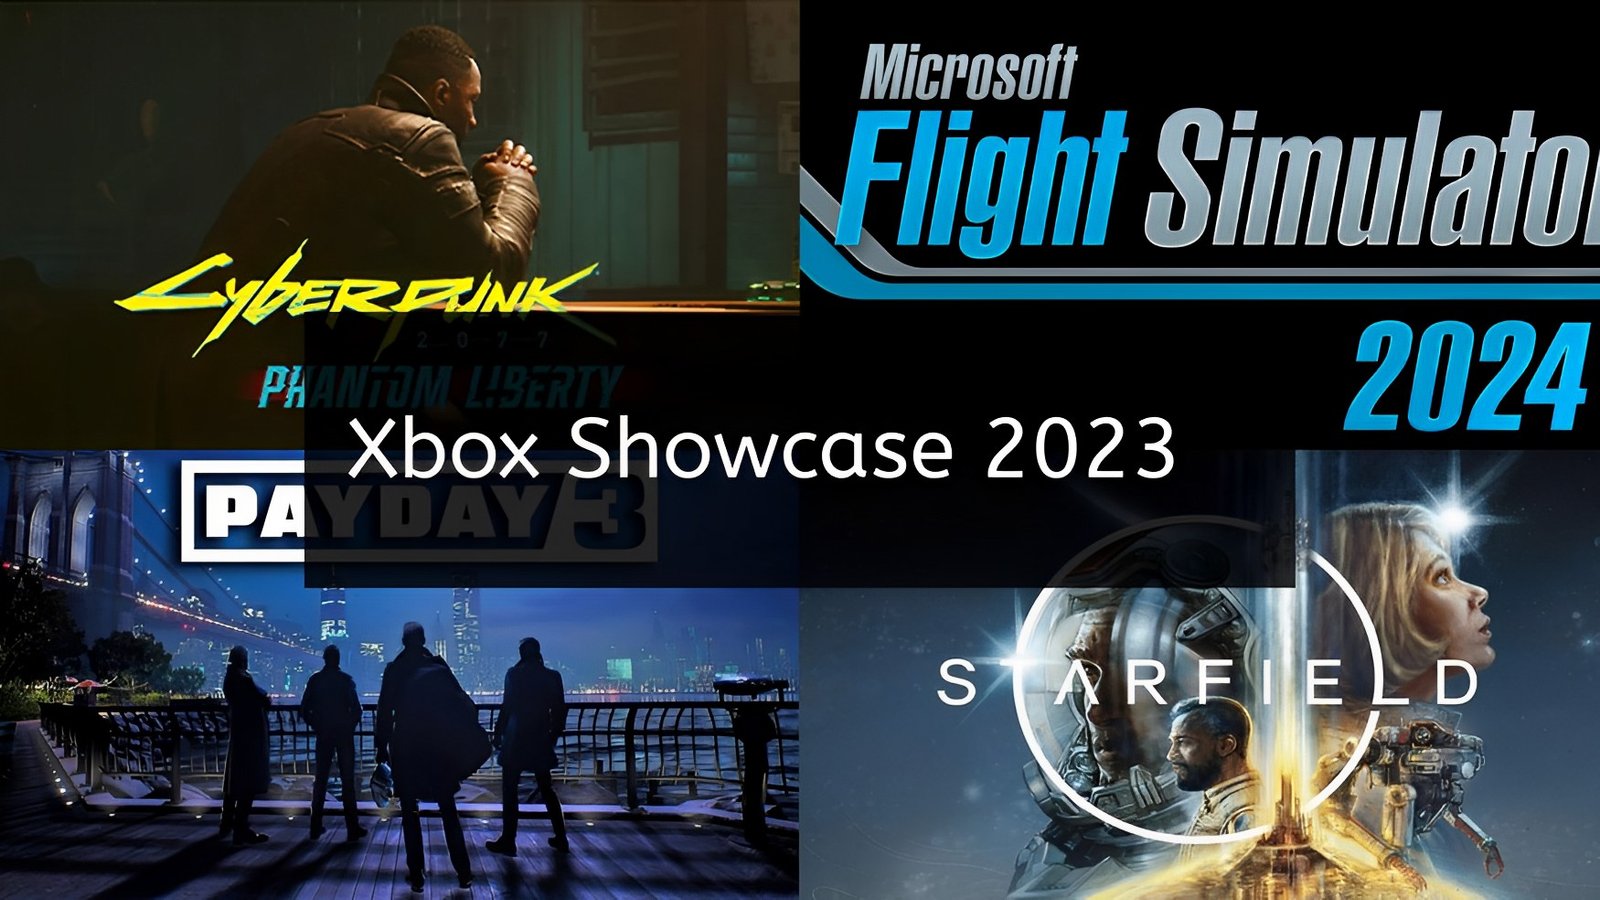 in xbox games showcase 2023 many of the biggest titles has been announced like starfiled, payday3, cyberpunk phantom liberty dlc update, flight simulator 2024 and much more